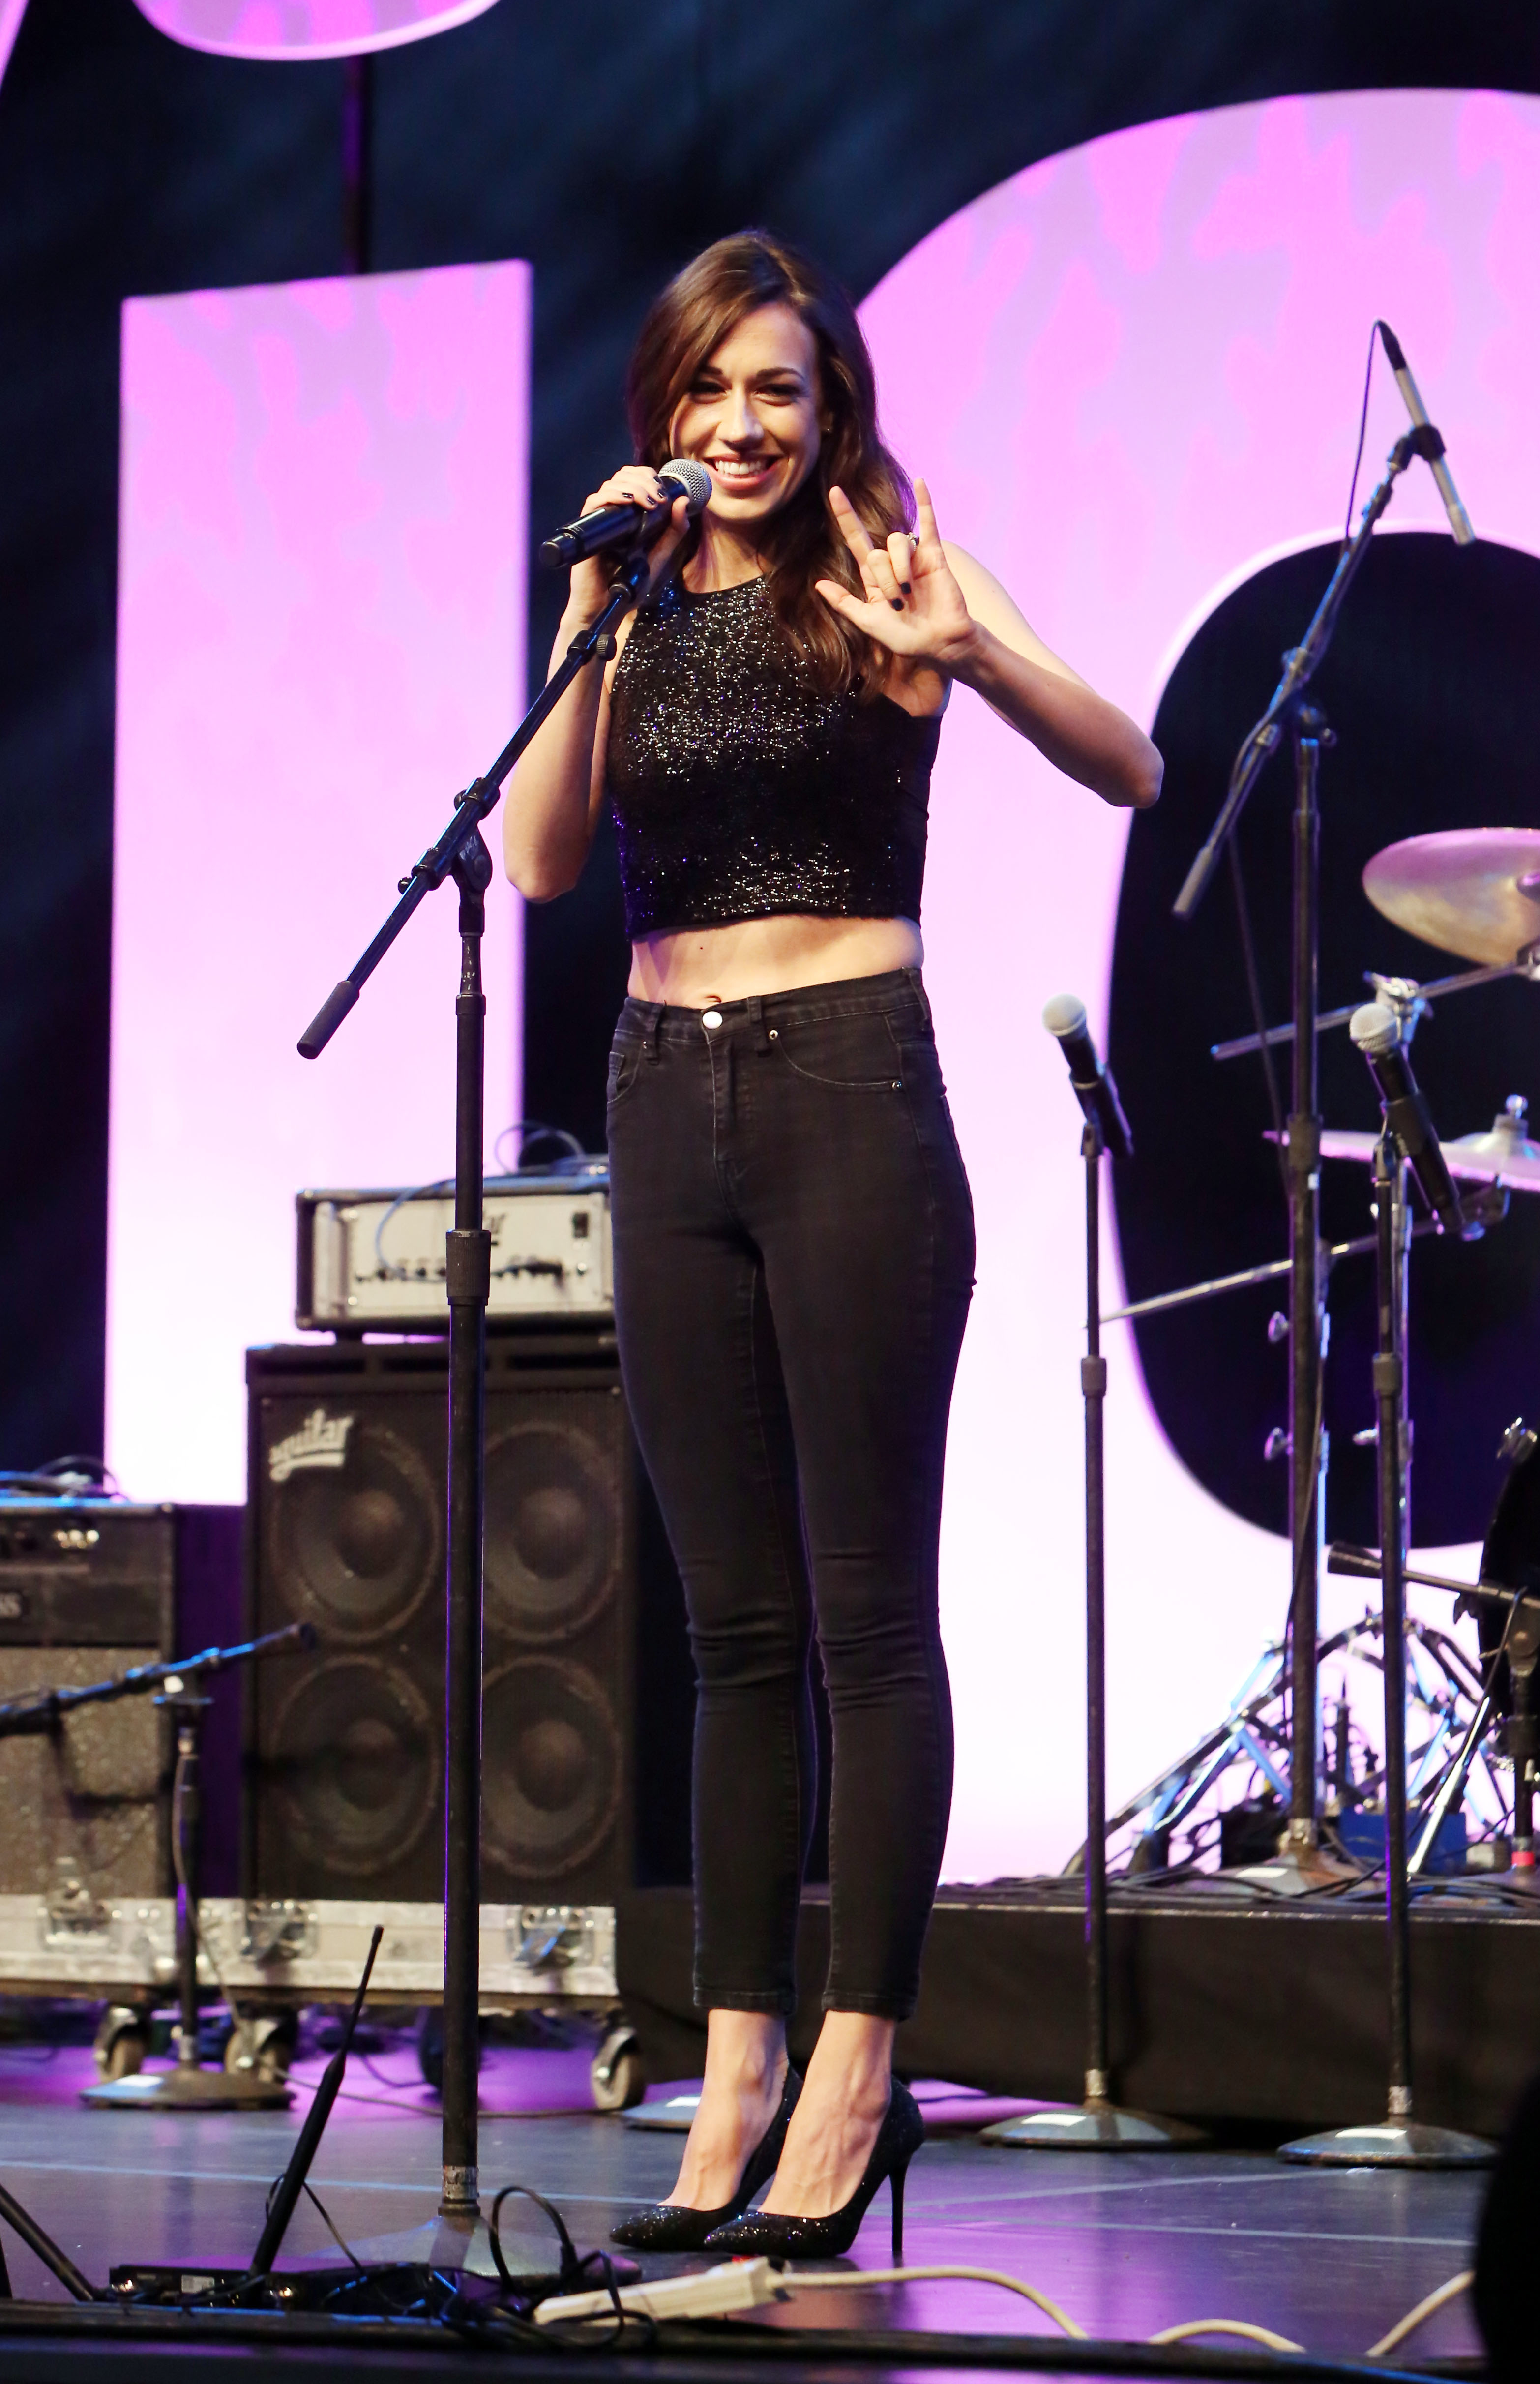 Colleen onstage